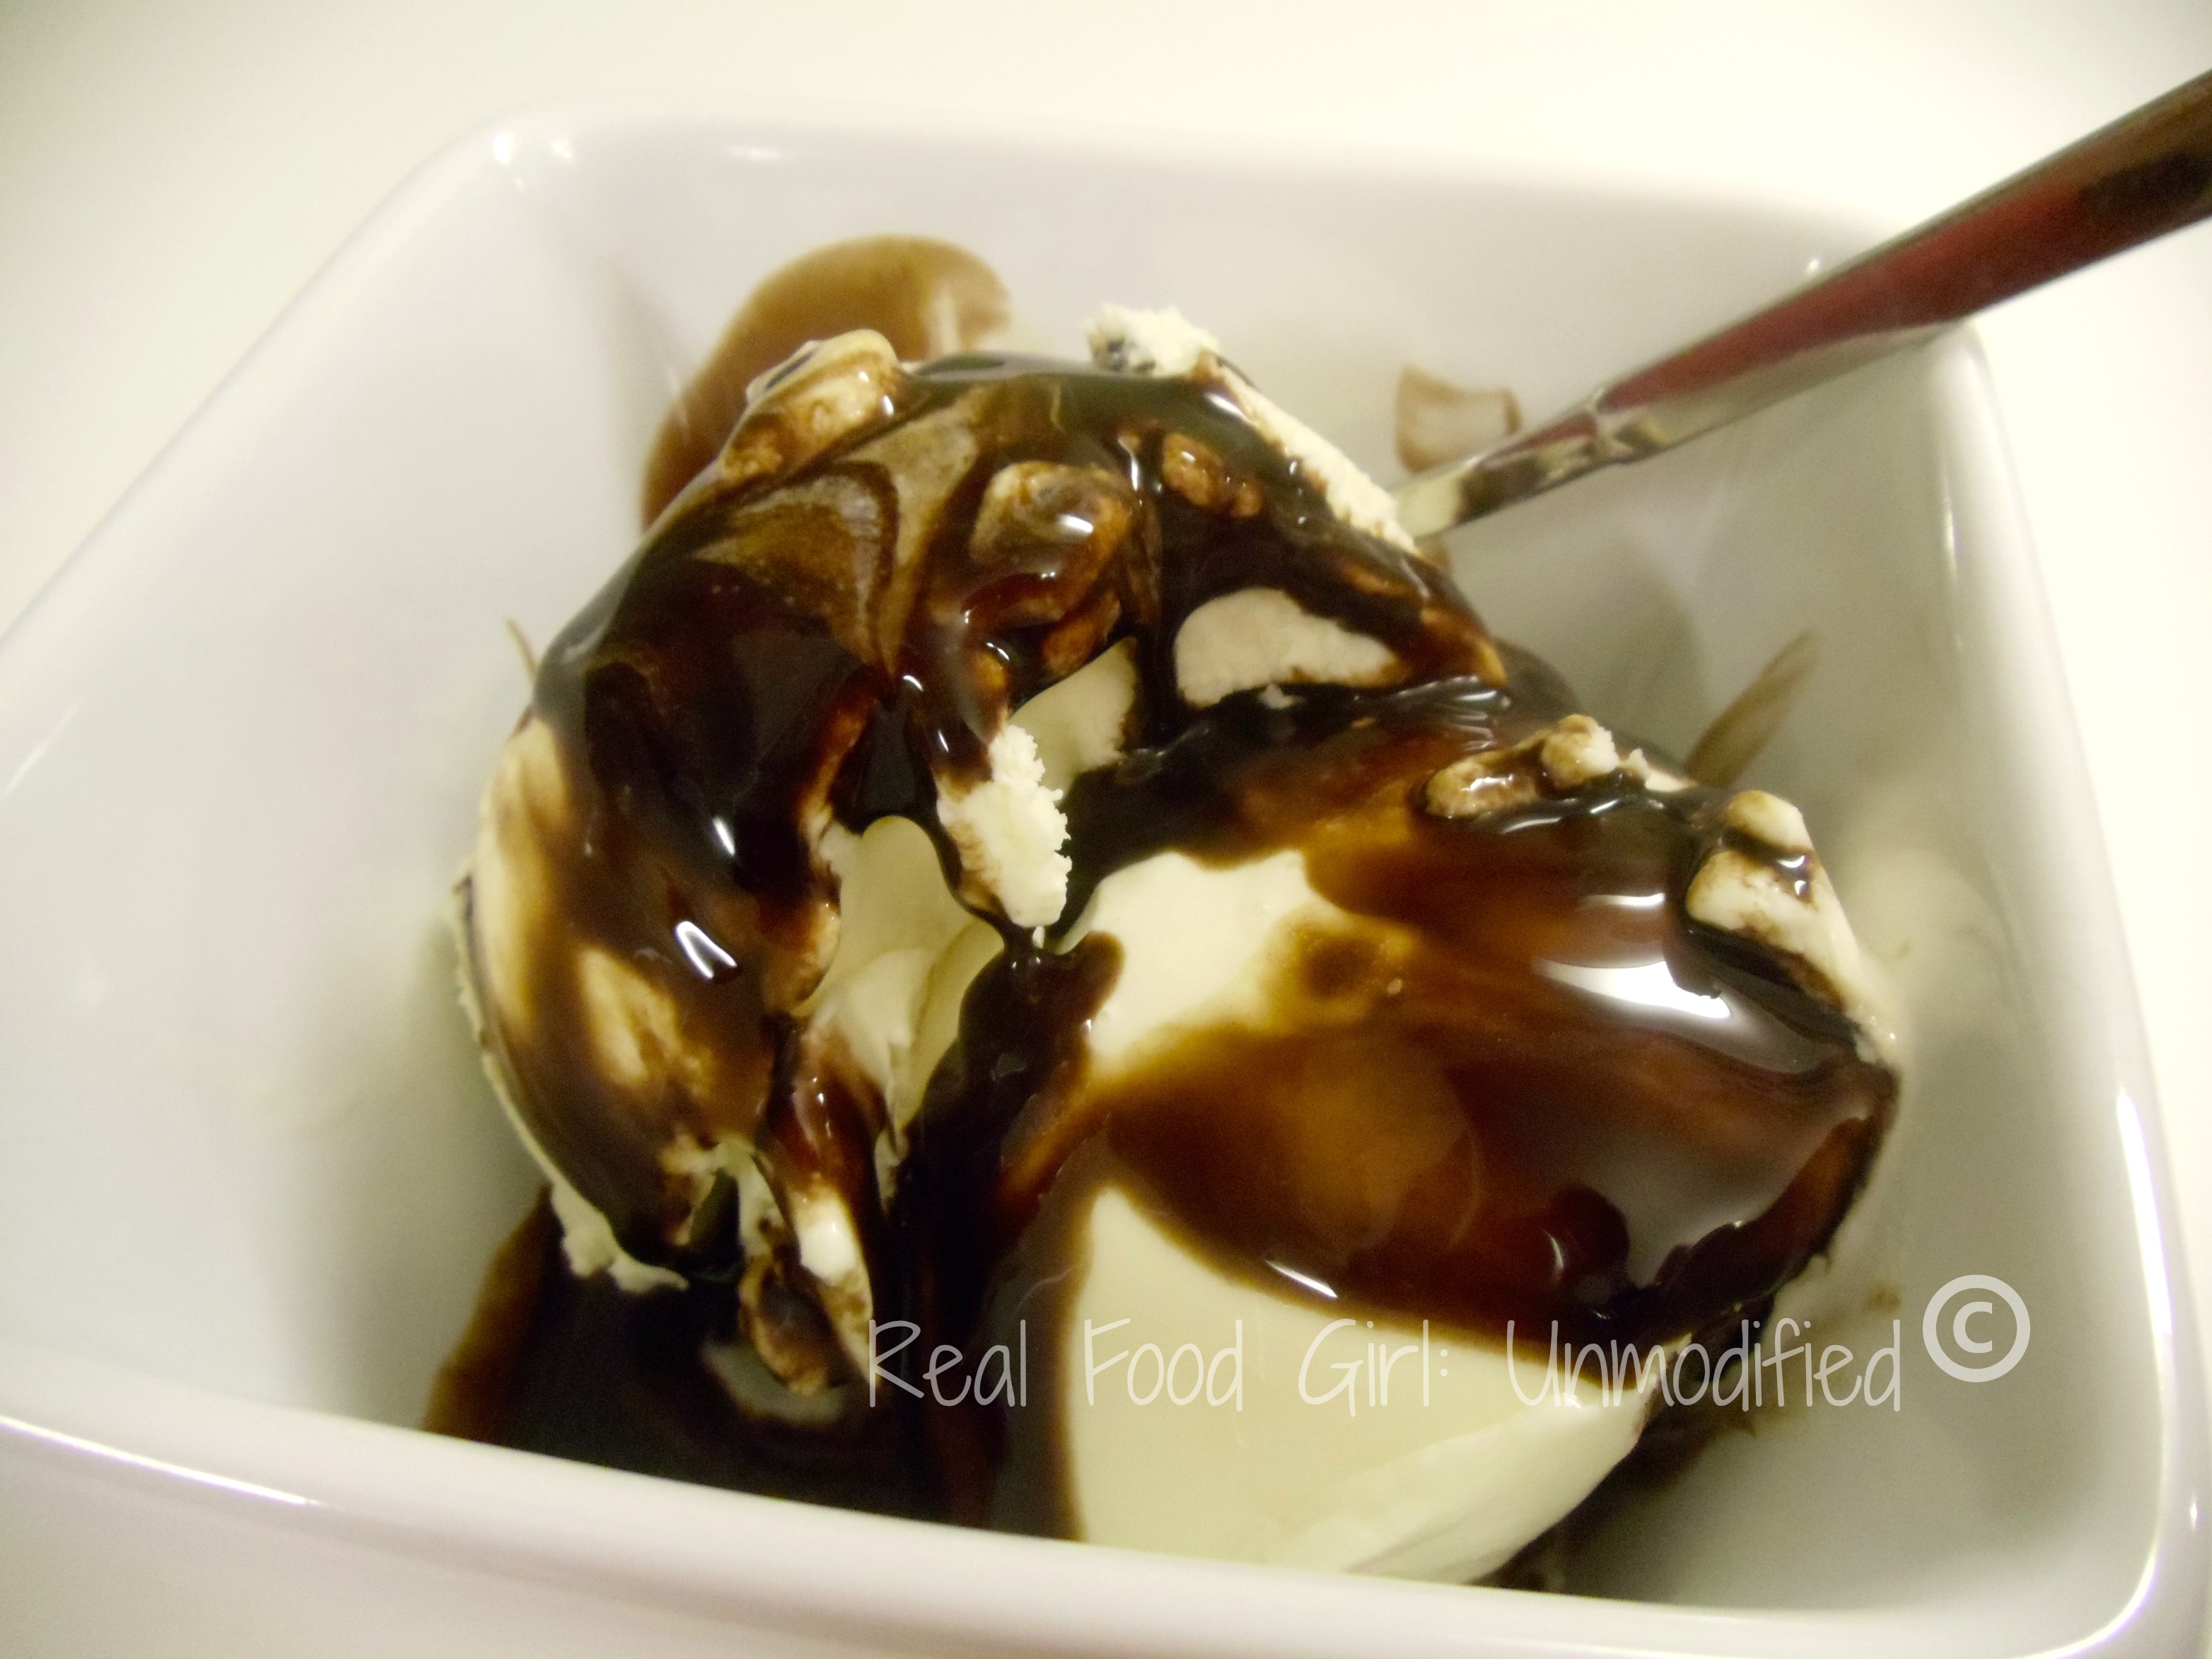 https://www.realfoodgirlunmodified.com/wp-content/uploads/2013/02/WM-chocolate-syrup.jpg